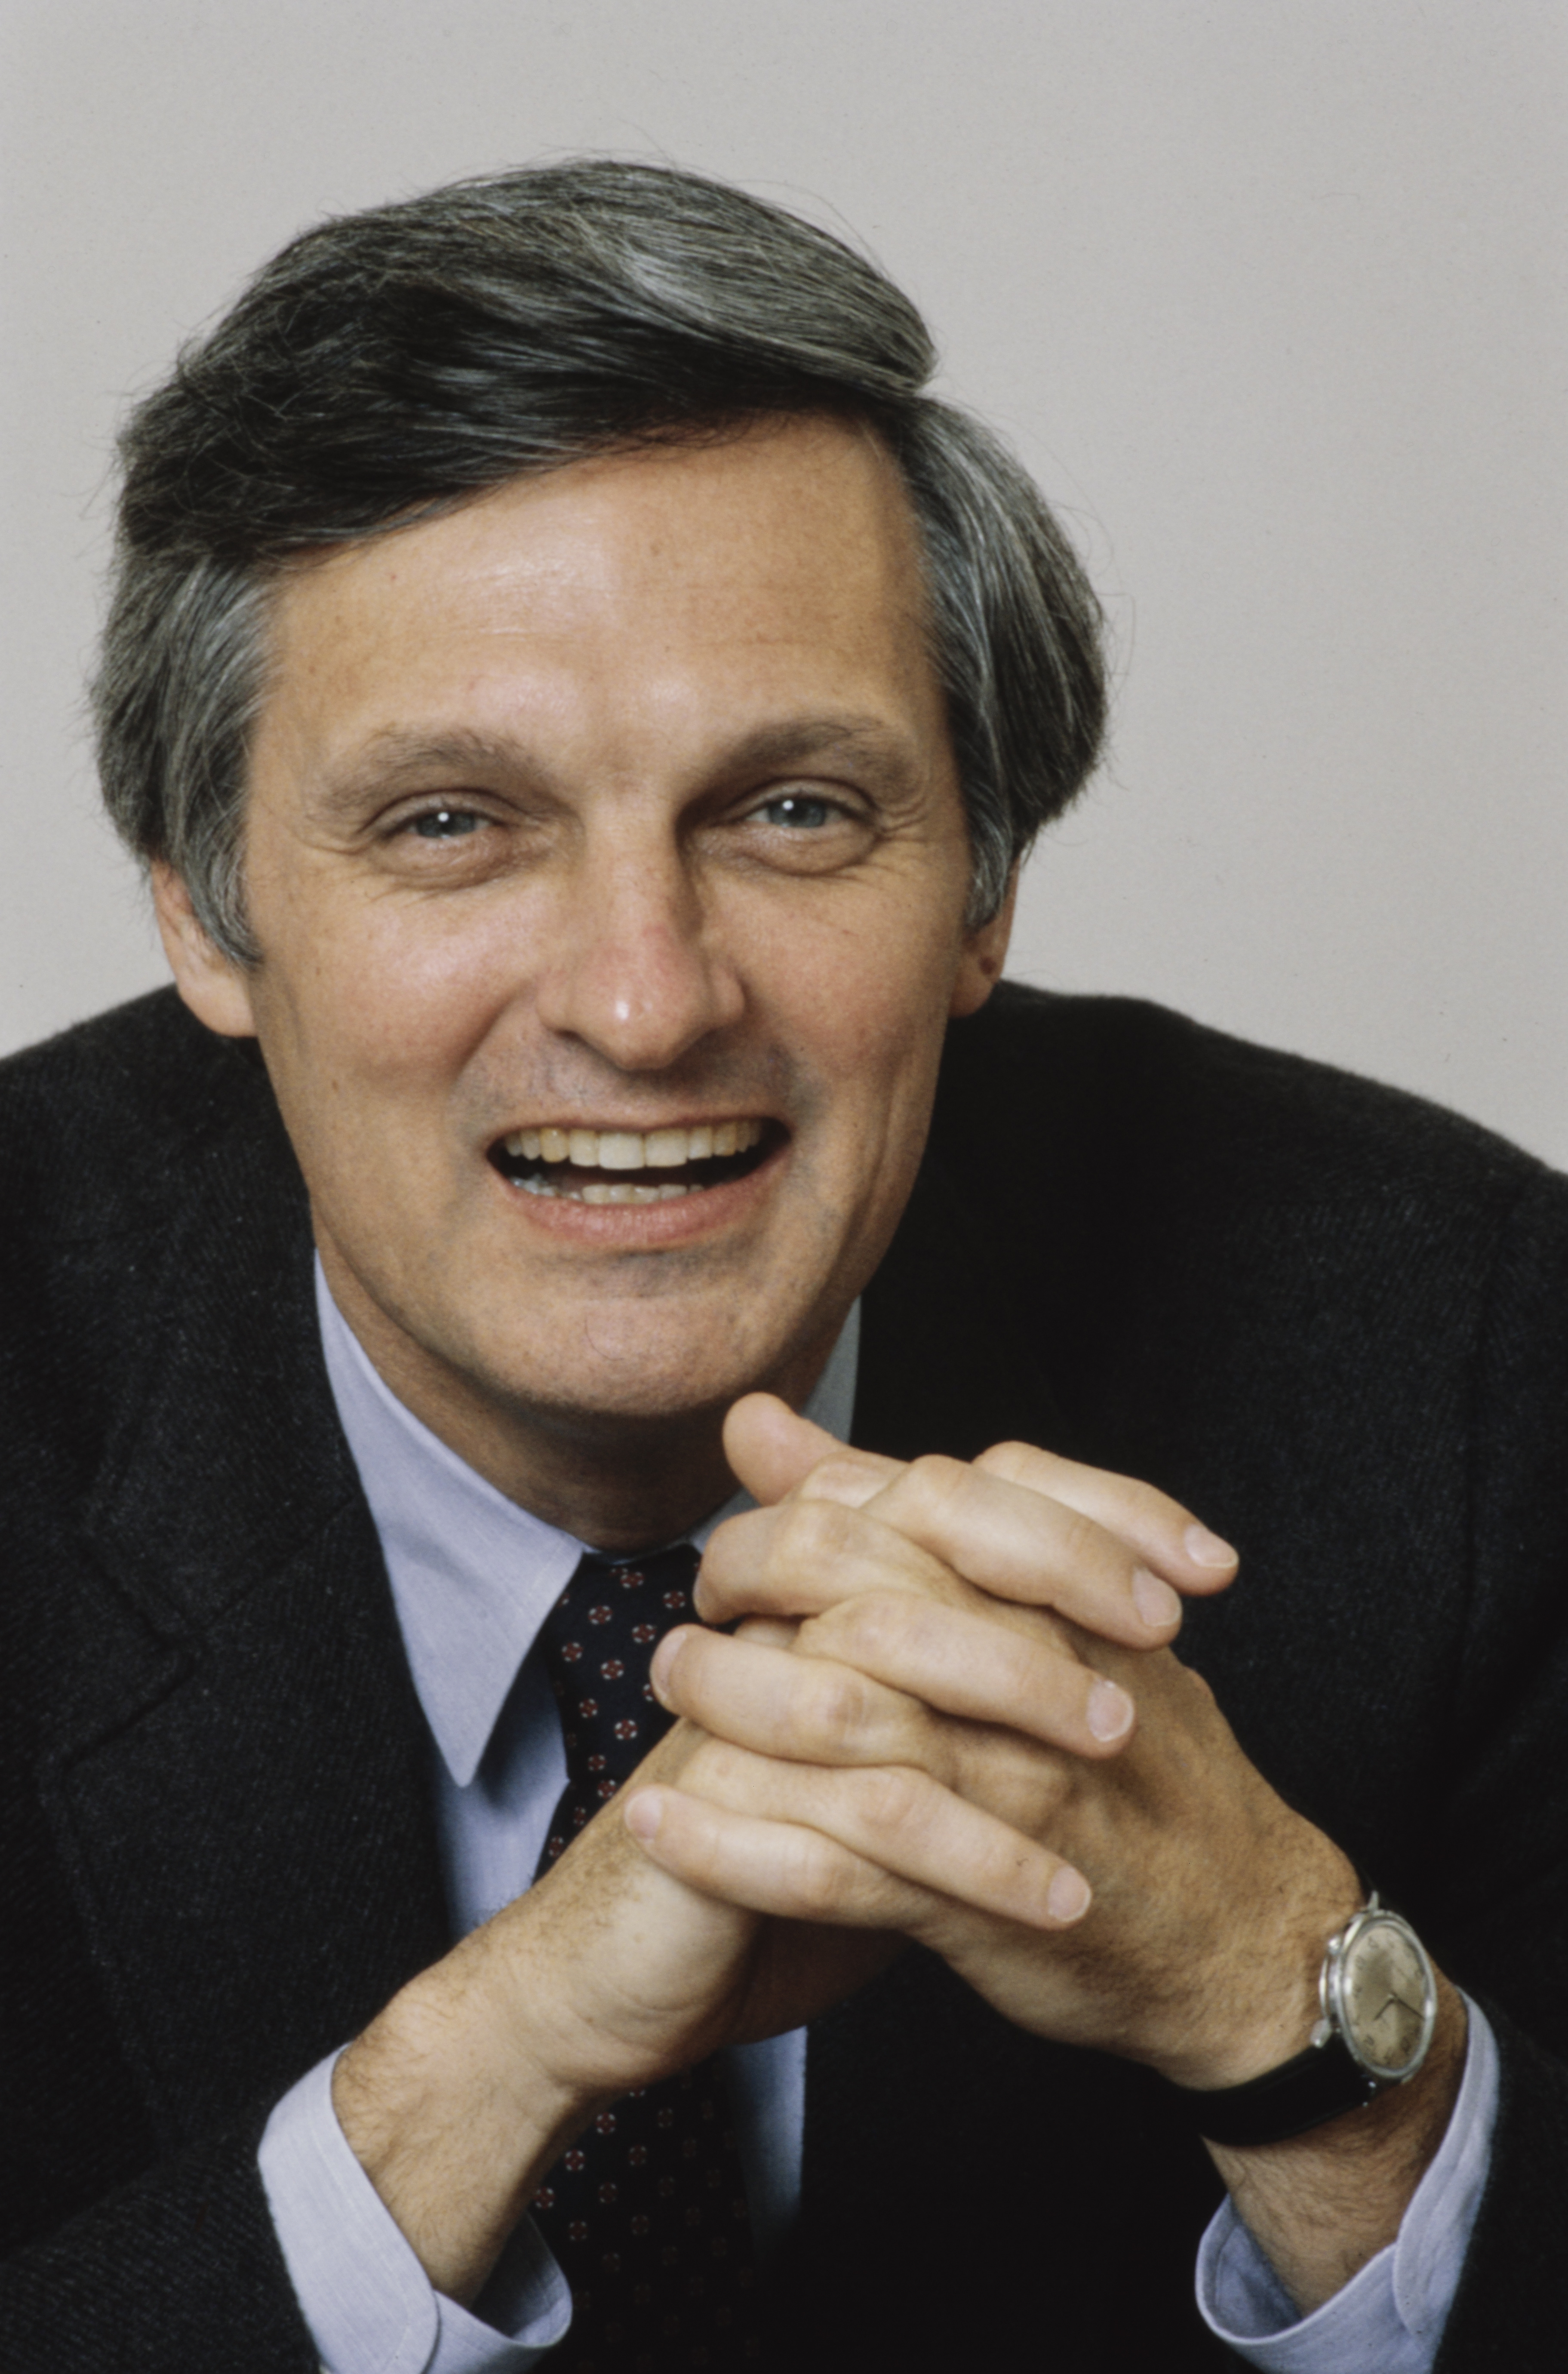 Alan Alda on March 19, 1979, in London, England. | Source: Getty Images